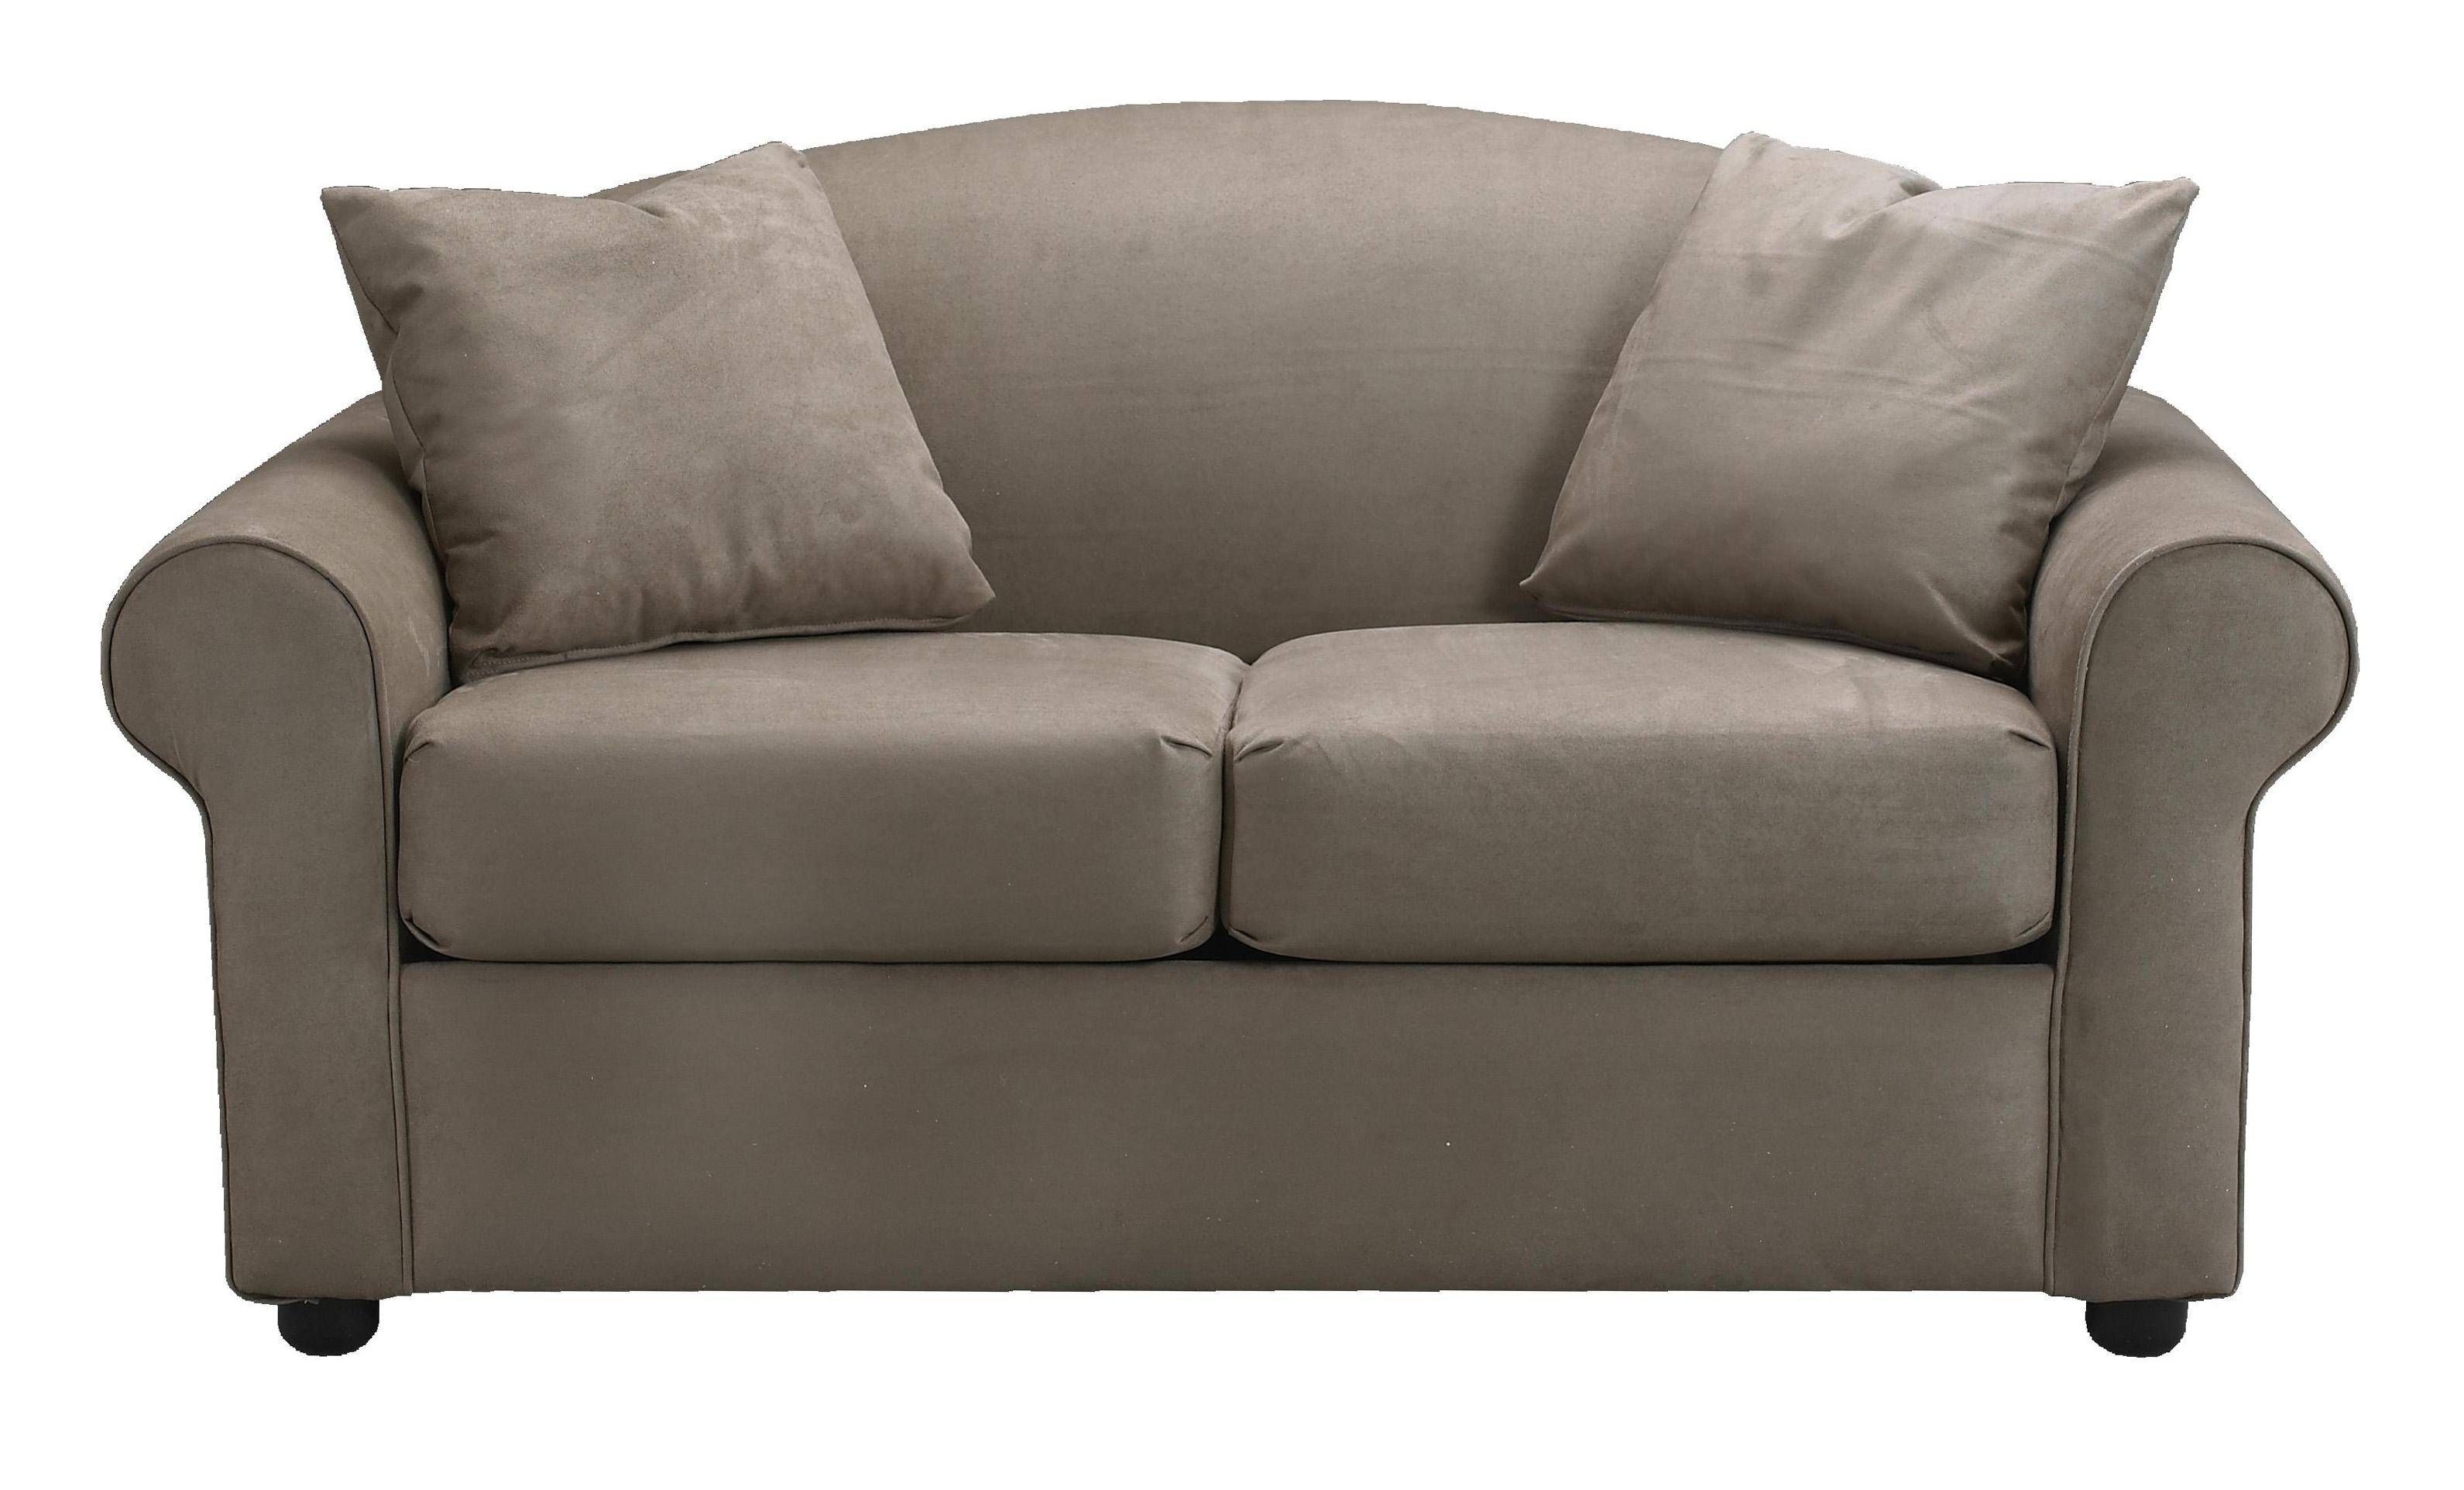 Furniture: Using Comfy Simmons Sleeper Sofa For Home Furniture With Regard To Cool Sofa Ideas (View 11 of 30)